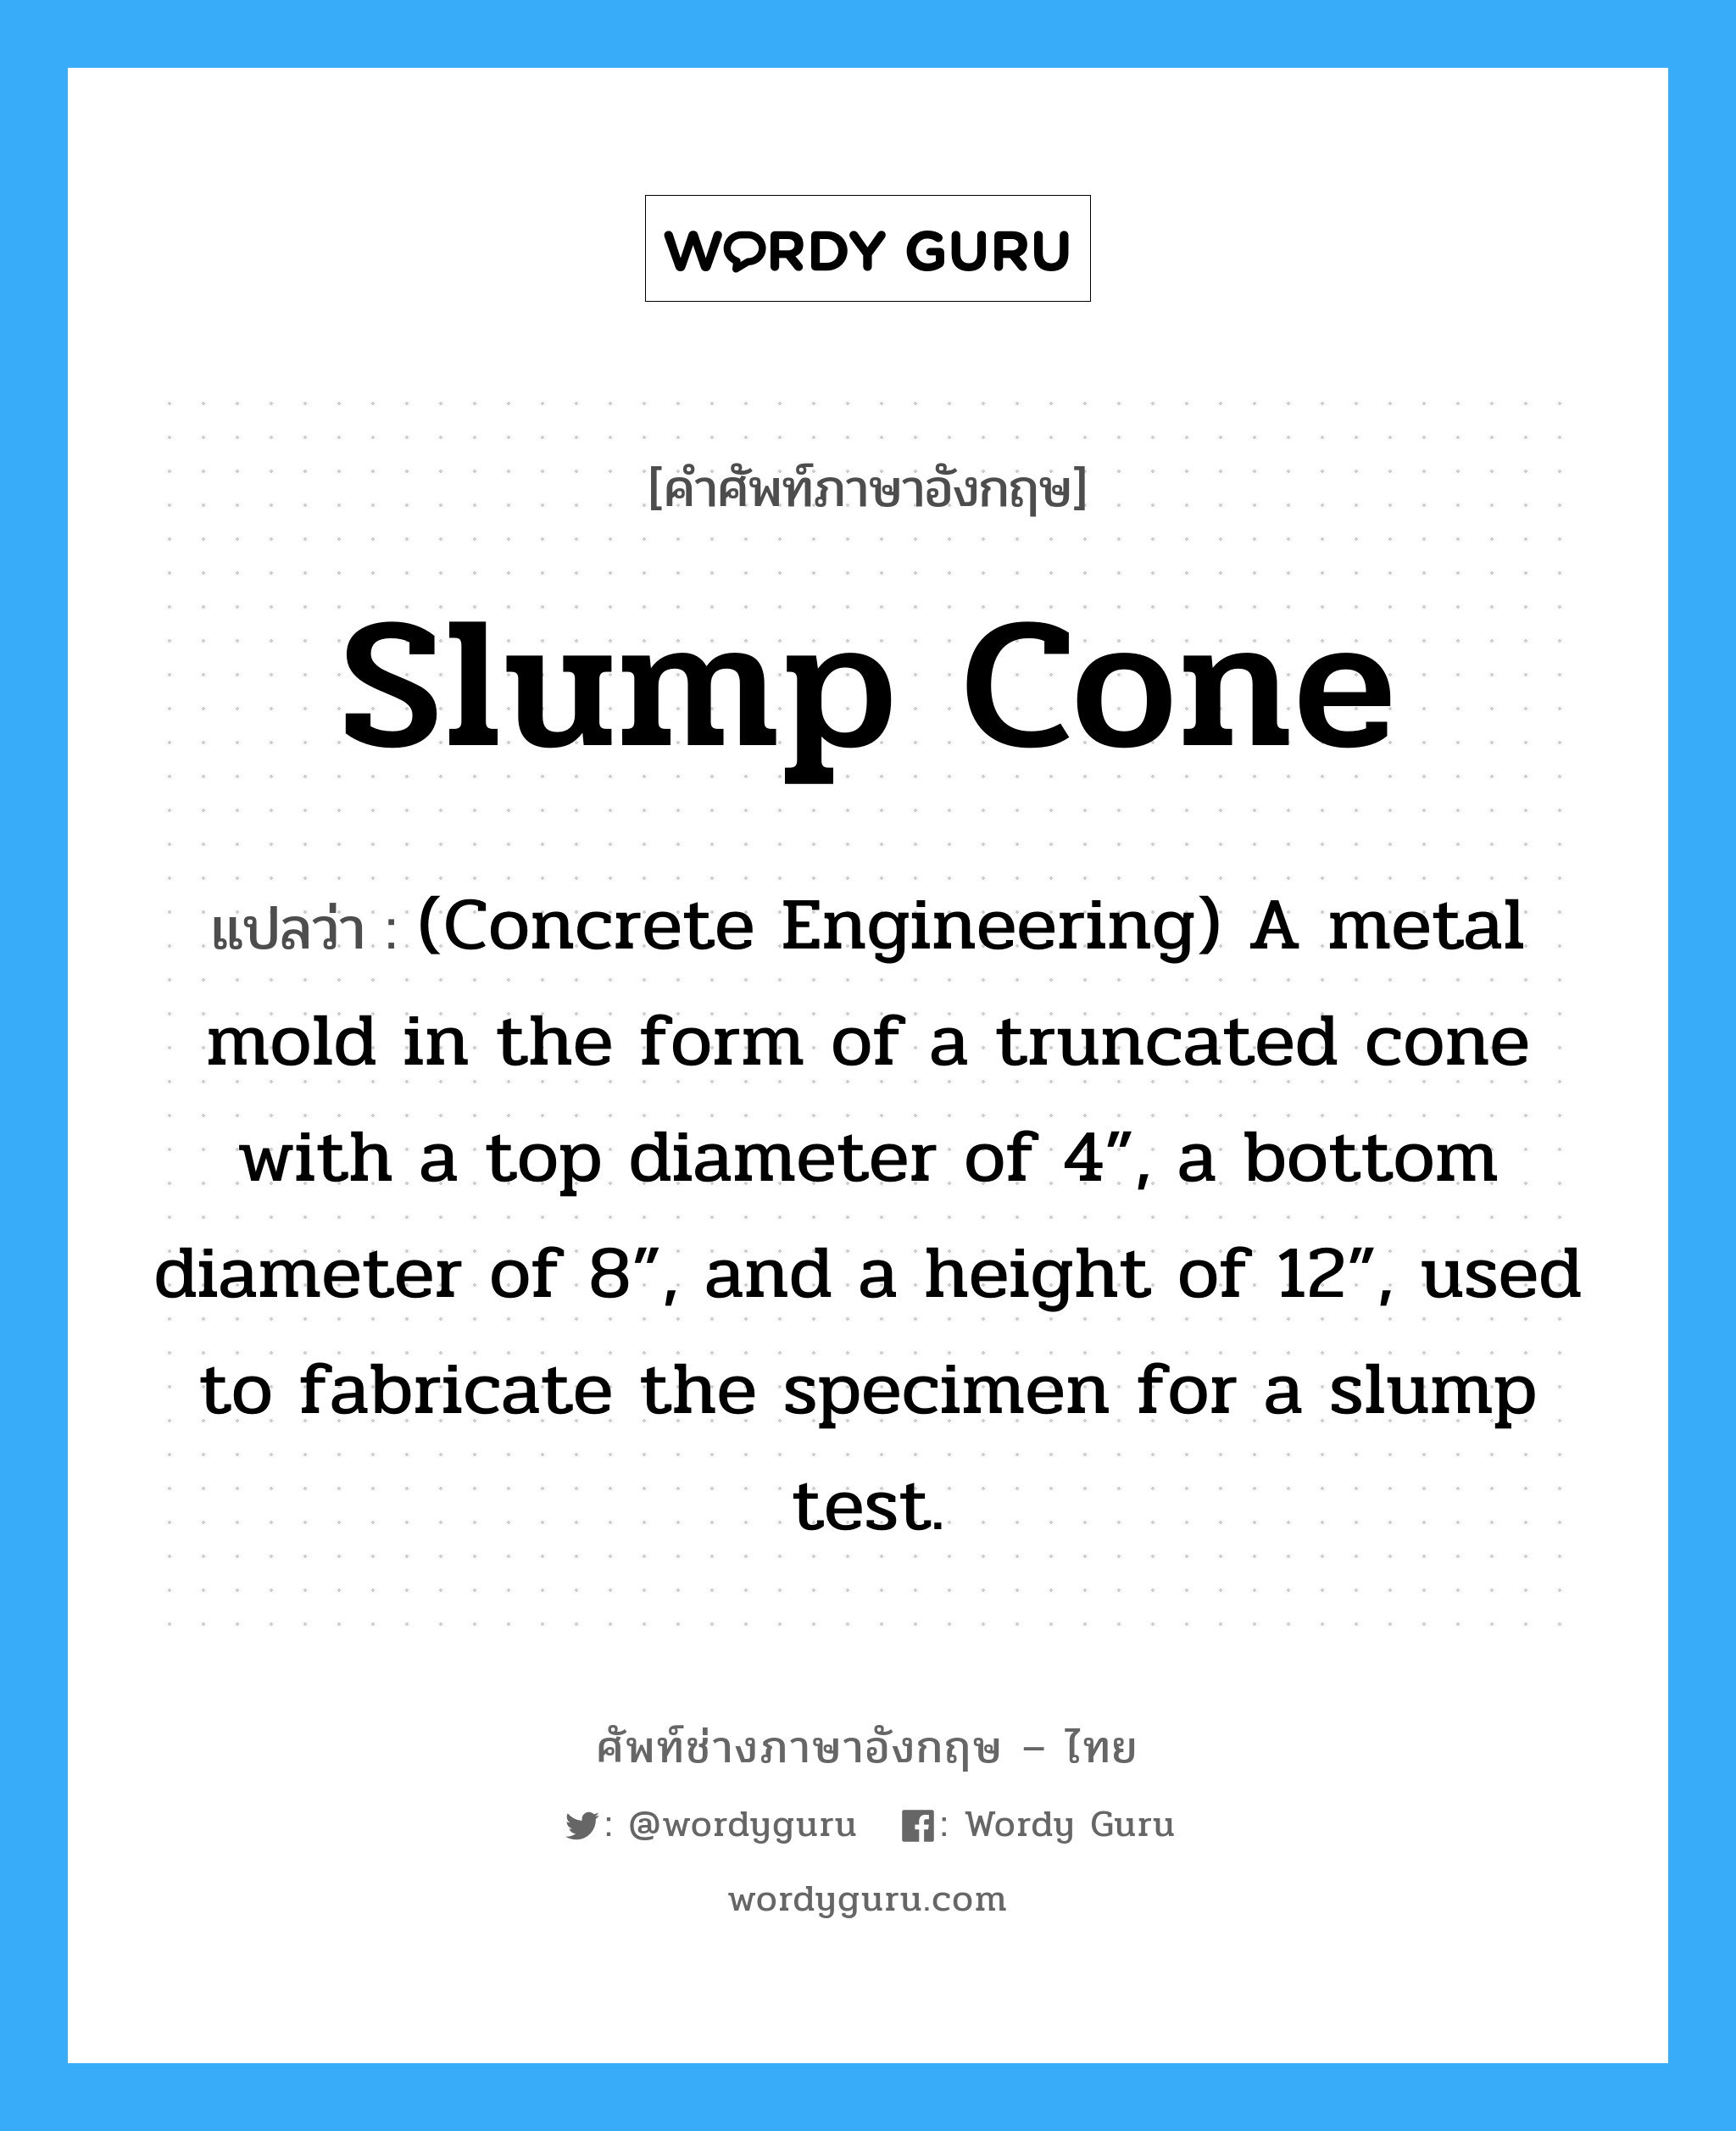 Slump Cone แปลว่า?, คำศัพท์ช่างภาษาอังกฤษ - ไทย Slump Cone คำศัพท์ภาษาอังกฤษ Slump Cone แปลว่า (Concrete Engineering) A metal mold in the form of a truncated cone with a top diameter of 4”, a bottom diameter of 8”, and a height of 12”, used to fabricate the specimen for a slump test.